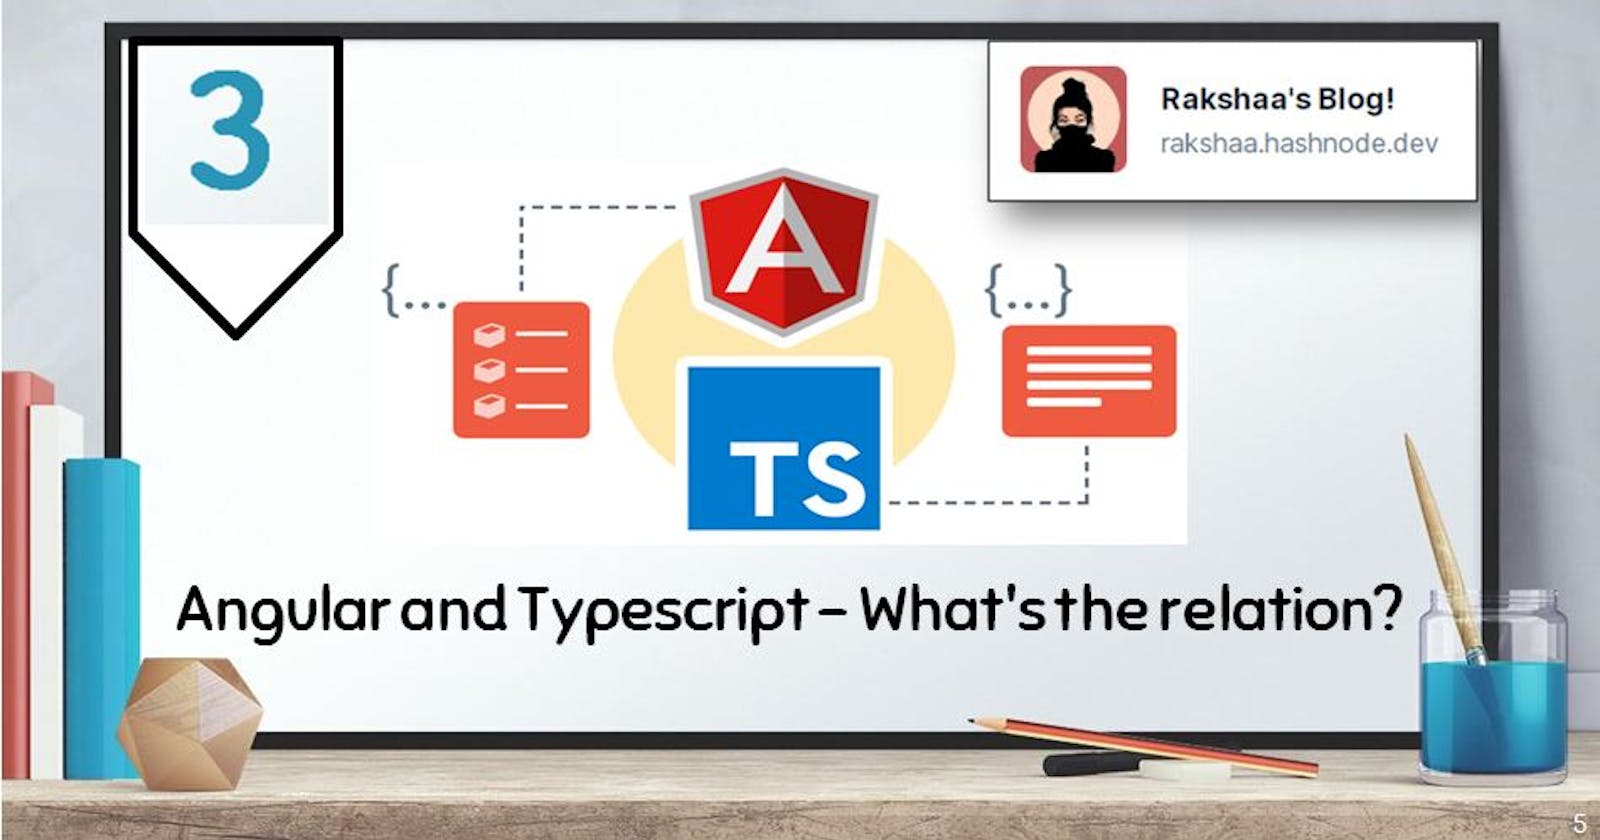 Angular and Typescript - What's the relation?